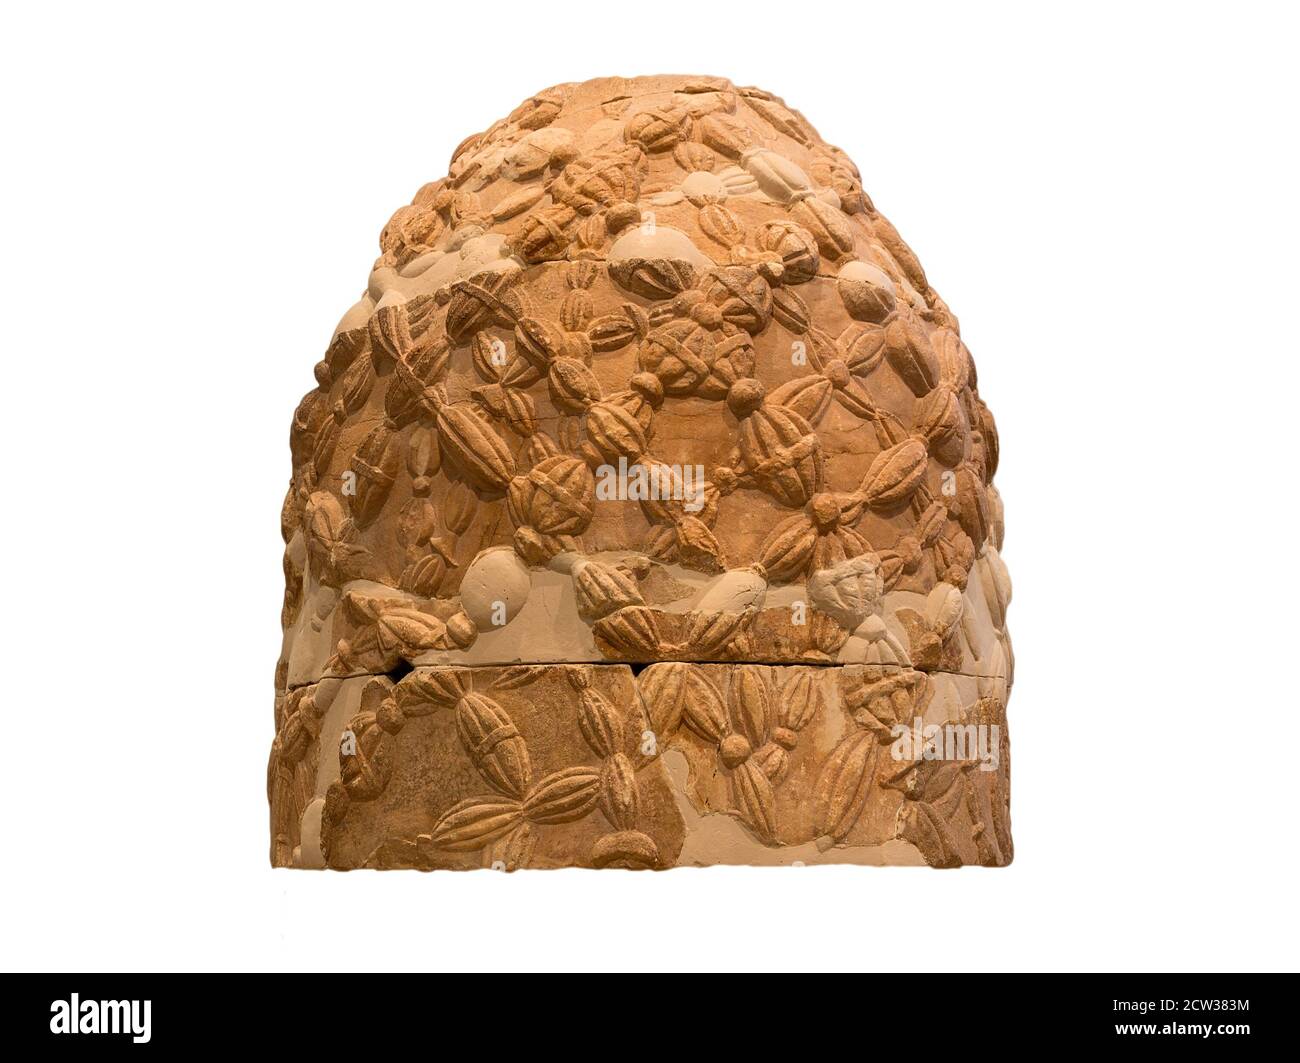 The Omphalos stone from Delphi, Greece, isolated. Stock Photo